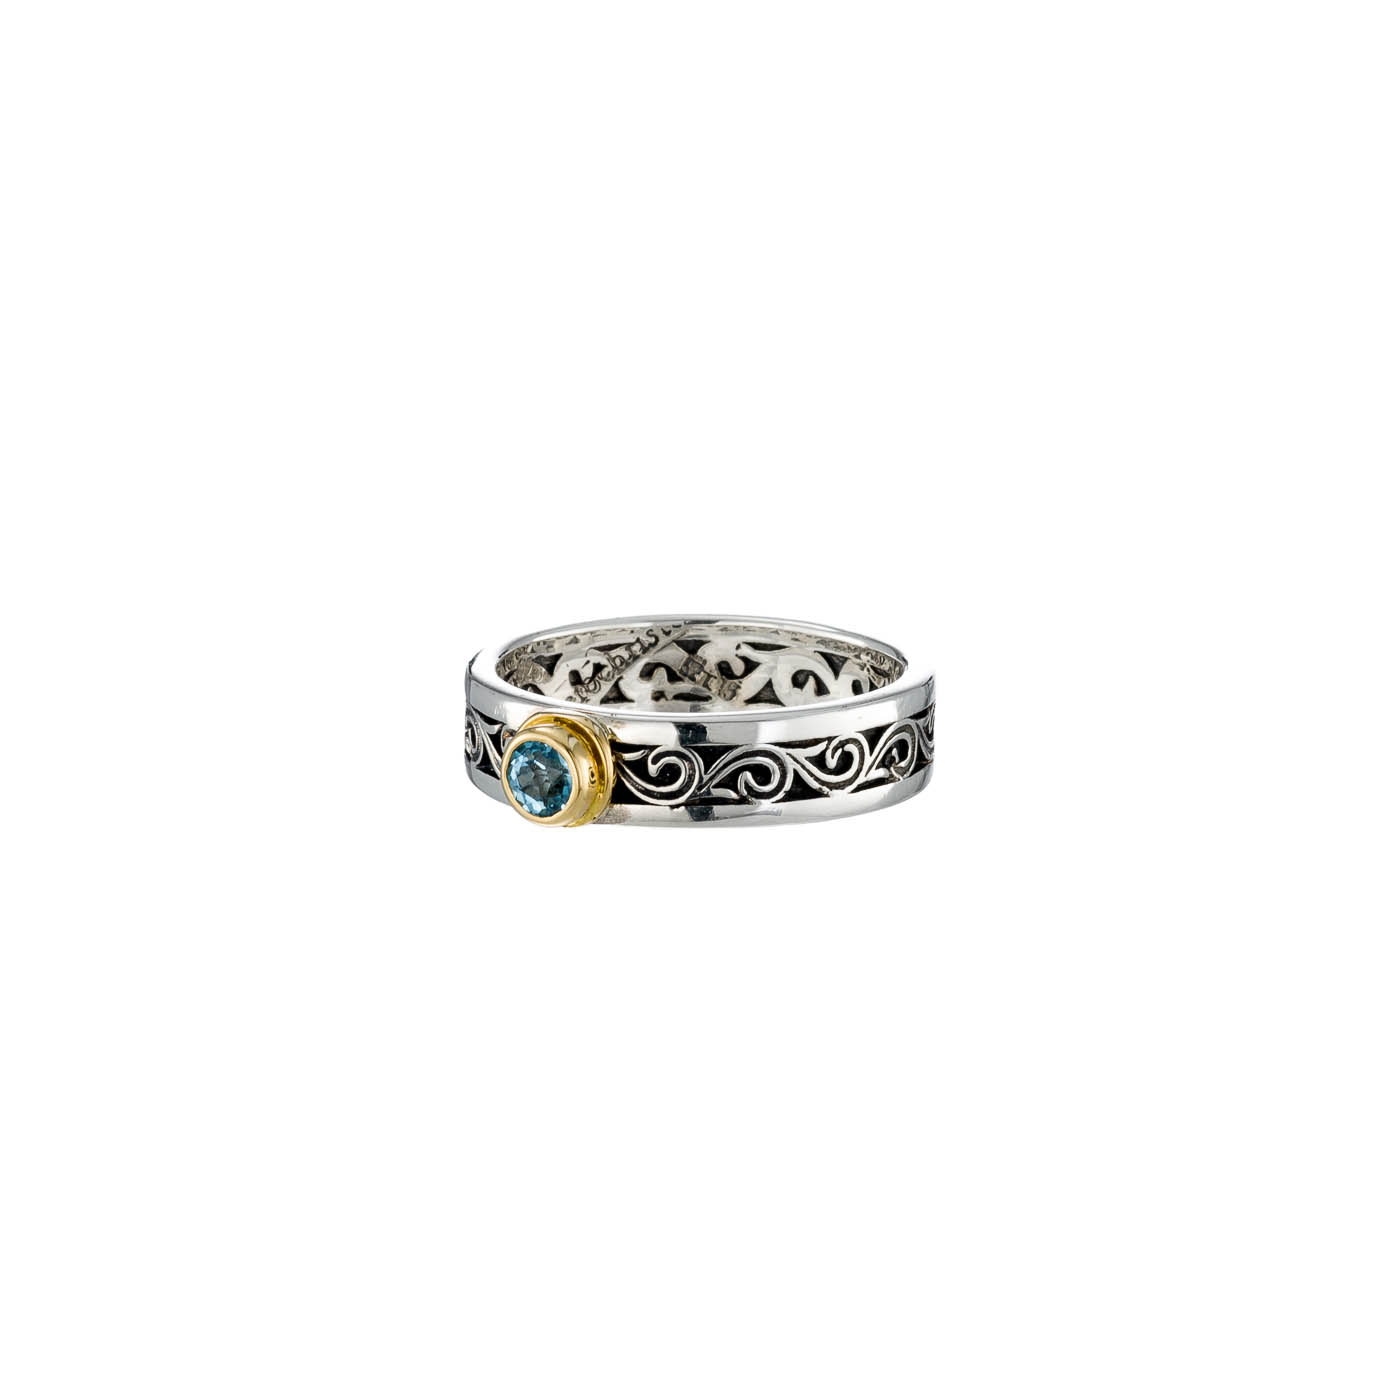 Kyma band ring in Sterling Silver with 18K Gold